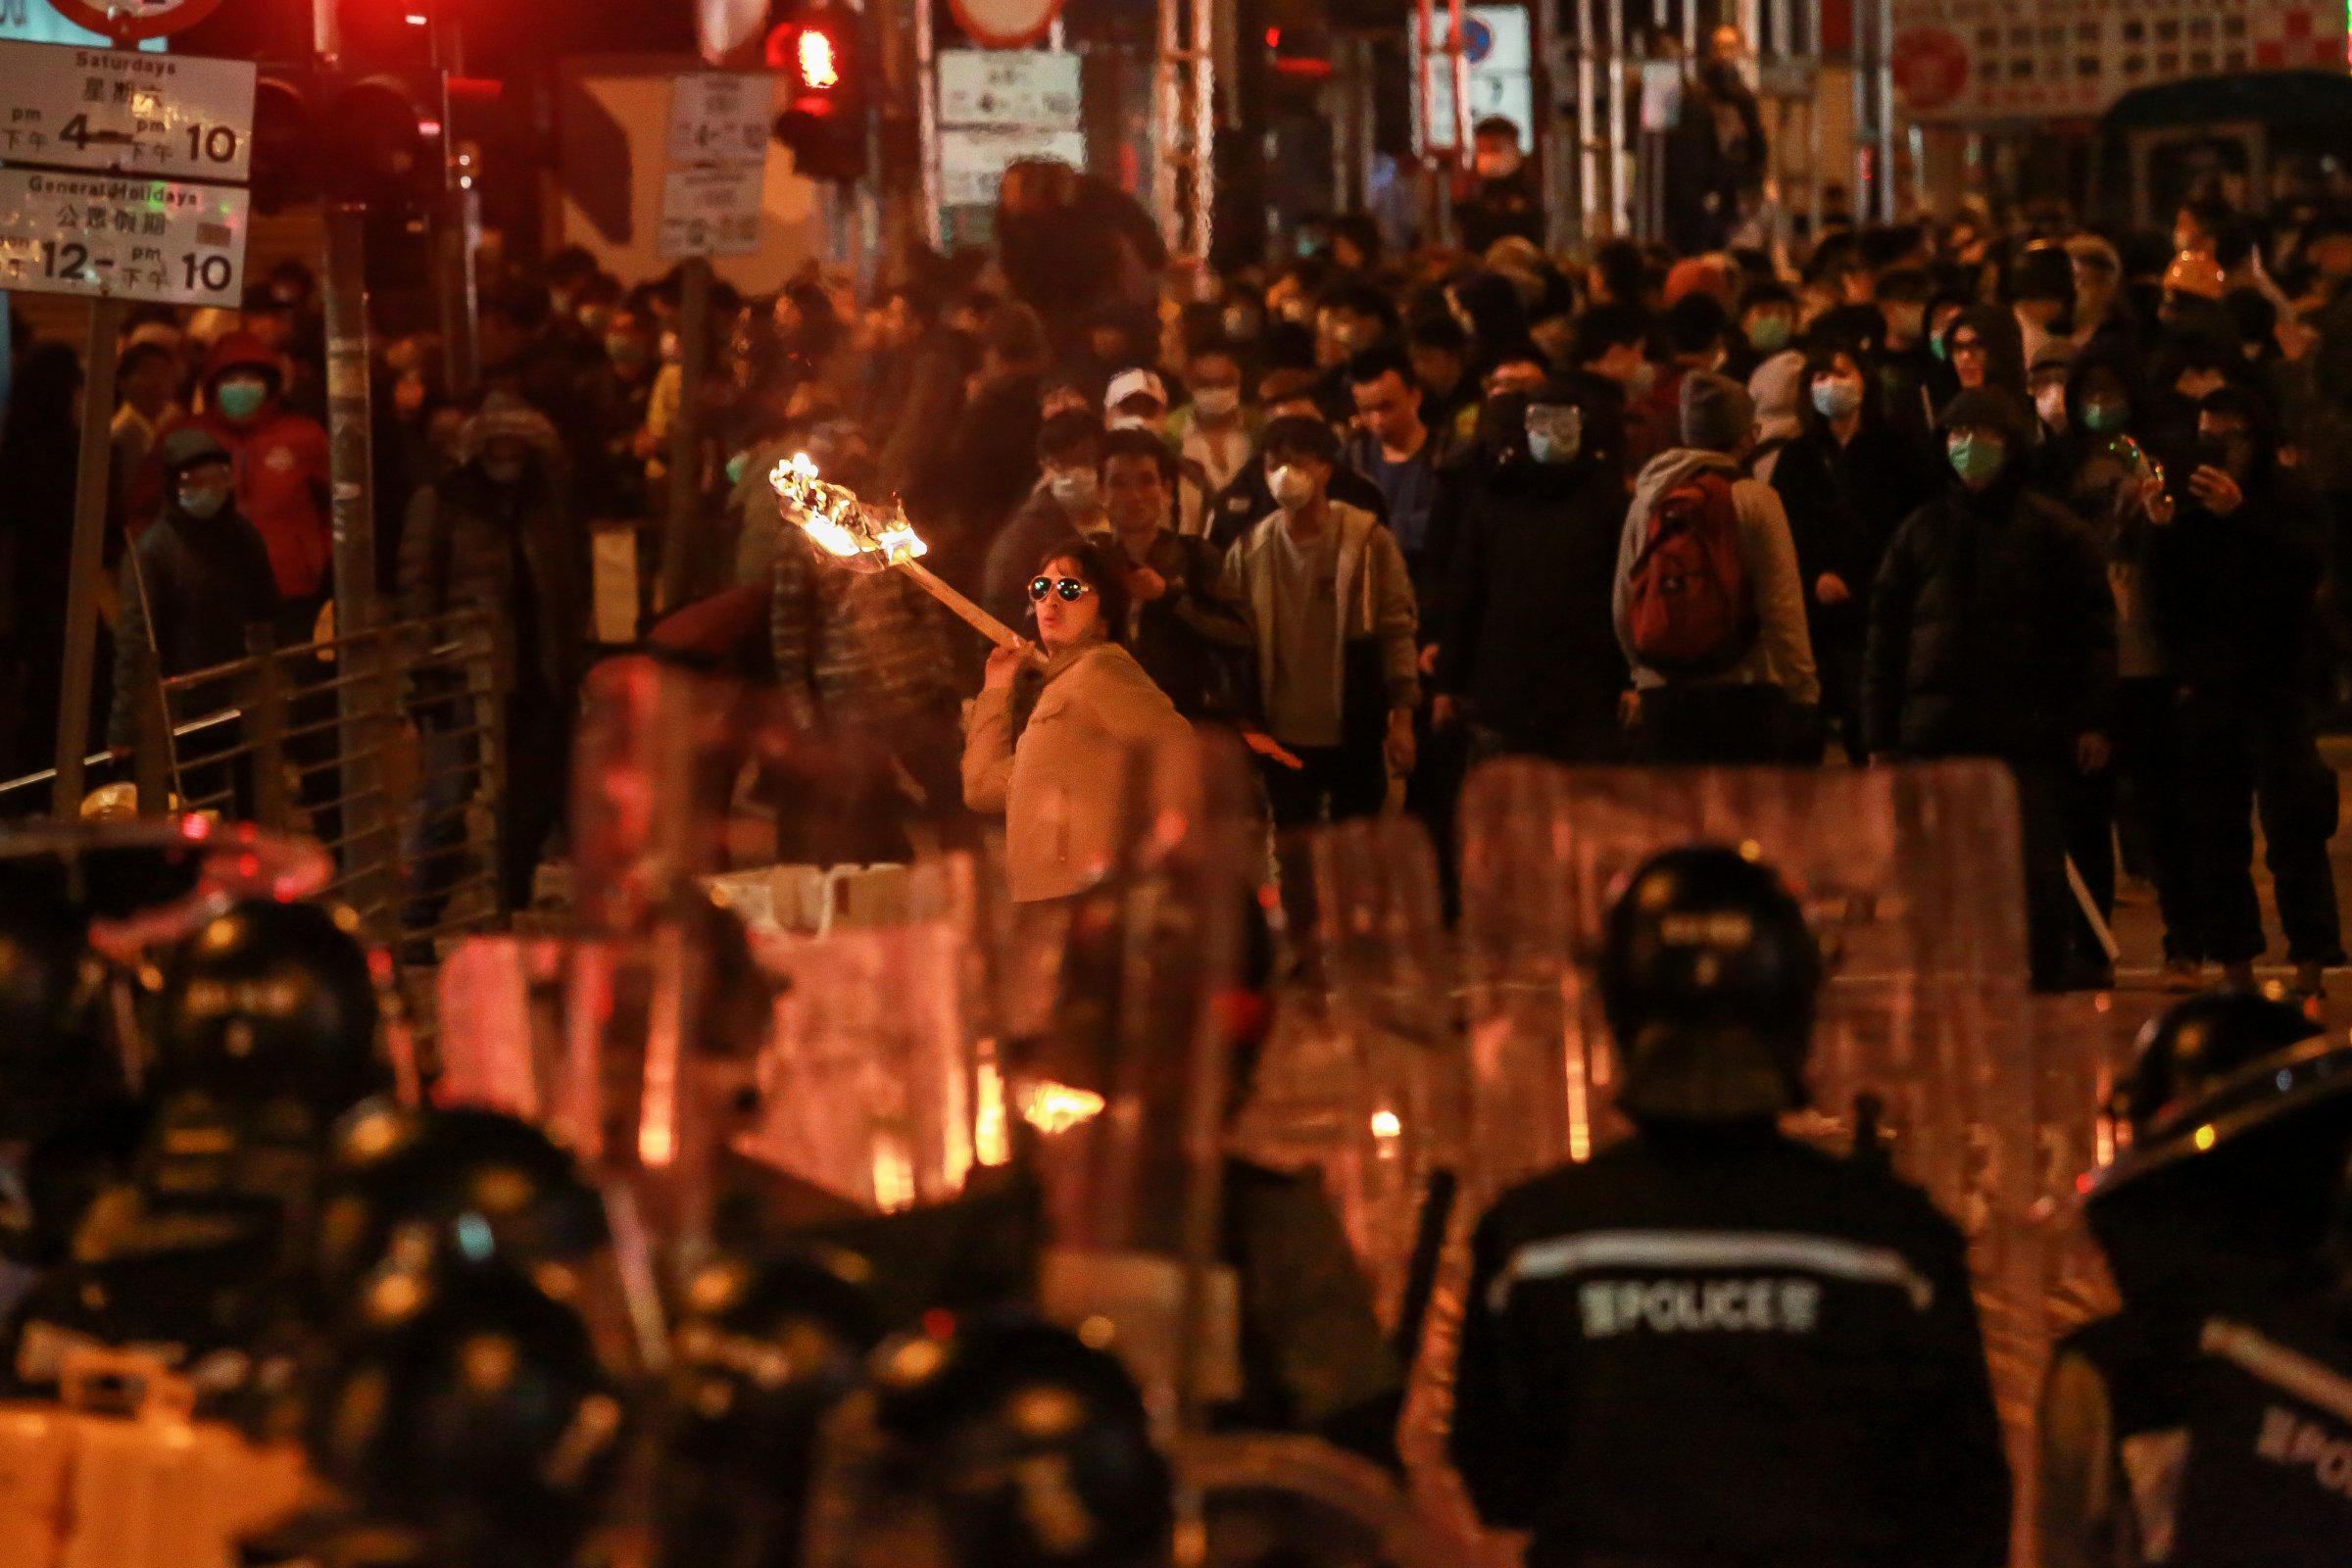 Protesters Riot In The Popular Shopping District Of Mong Kok